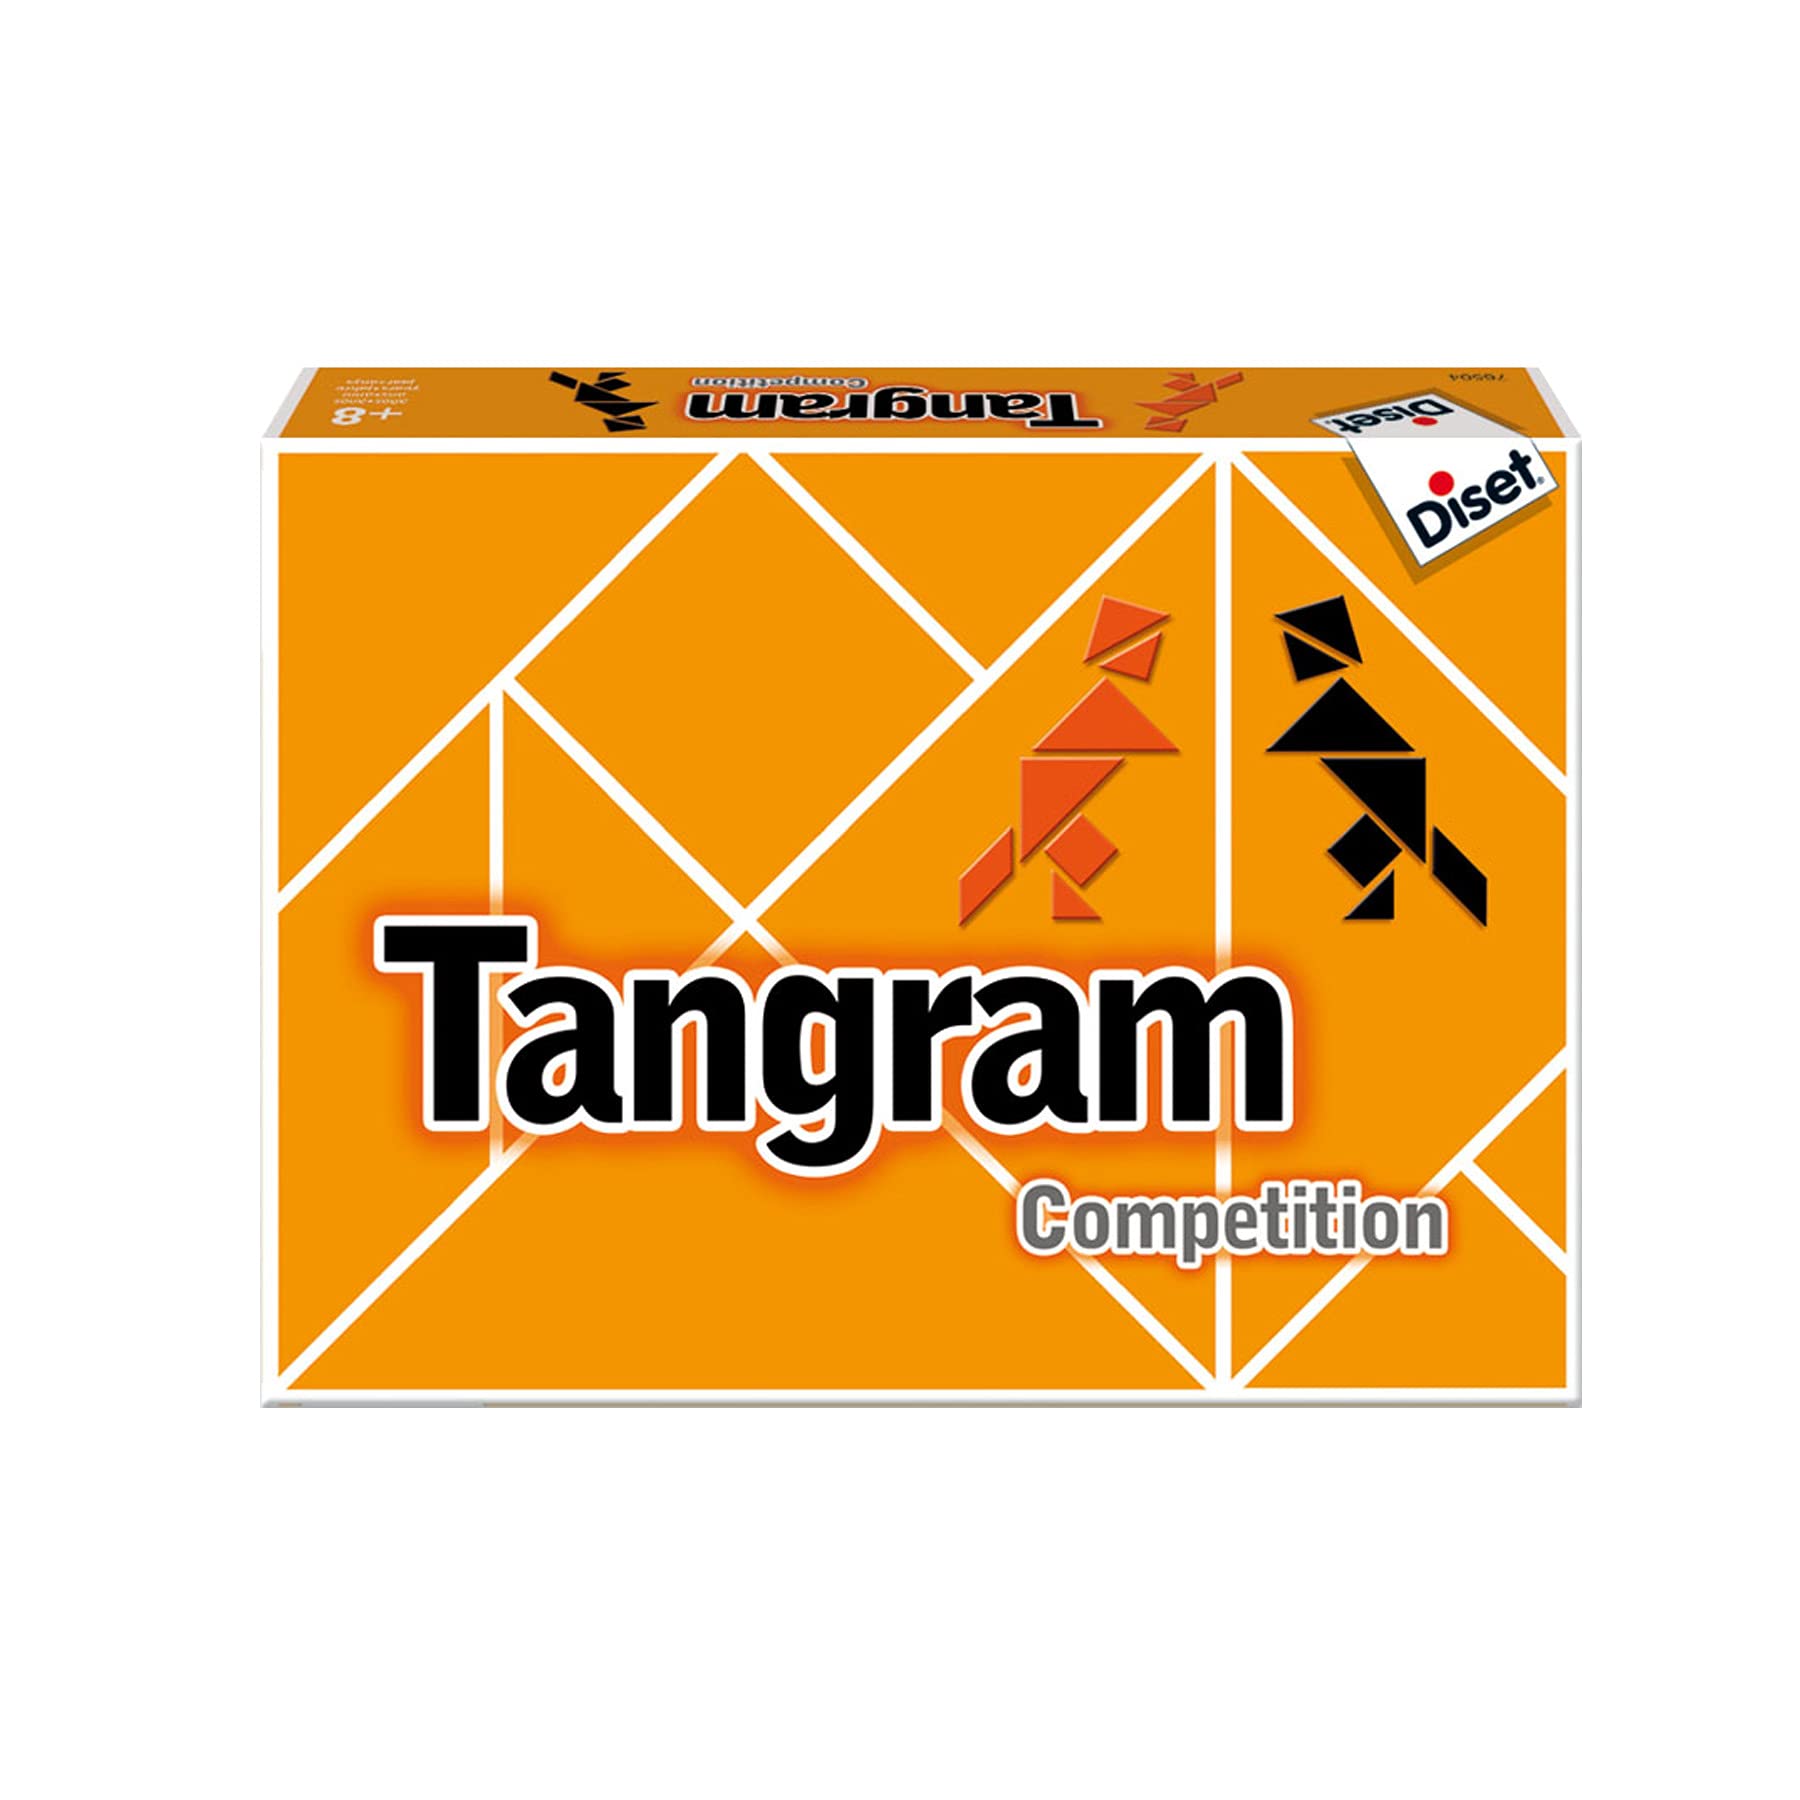 Tangram competition